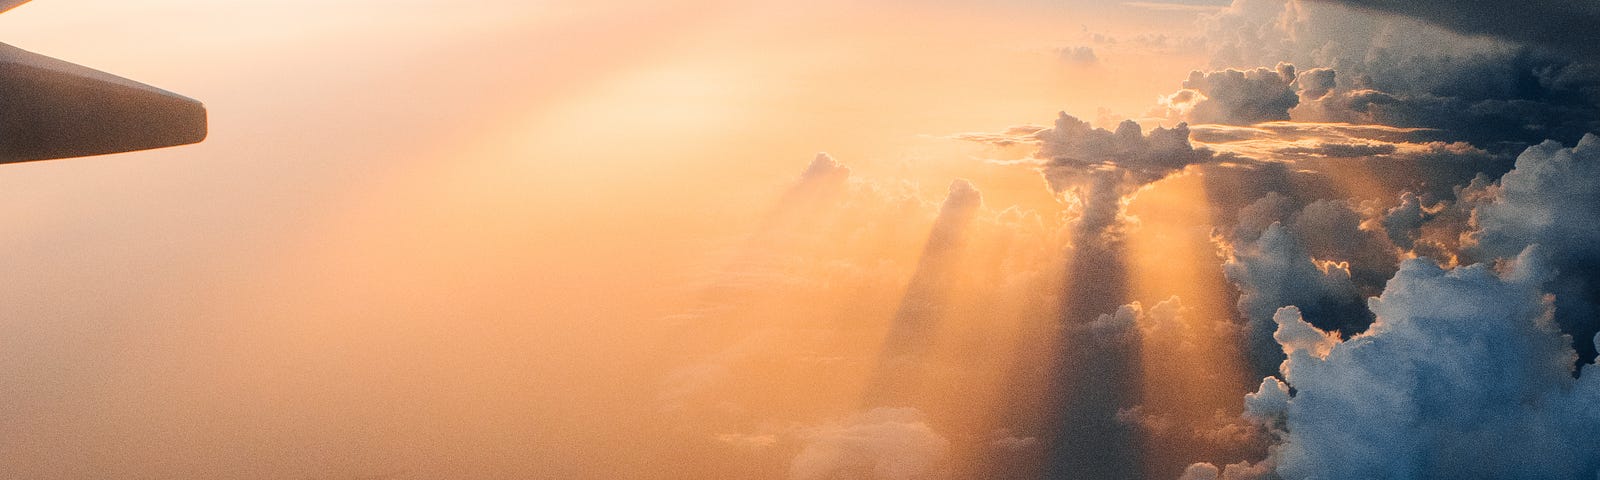 the view out of an aeroplane window, with clouds and rays of orange sunlight coming through